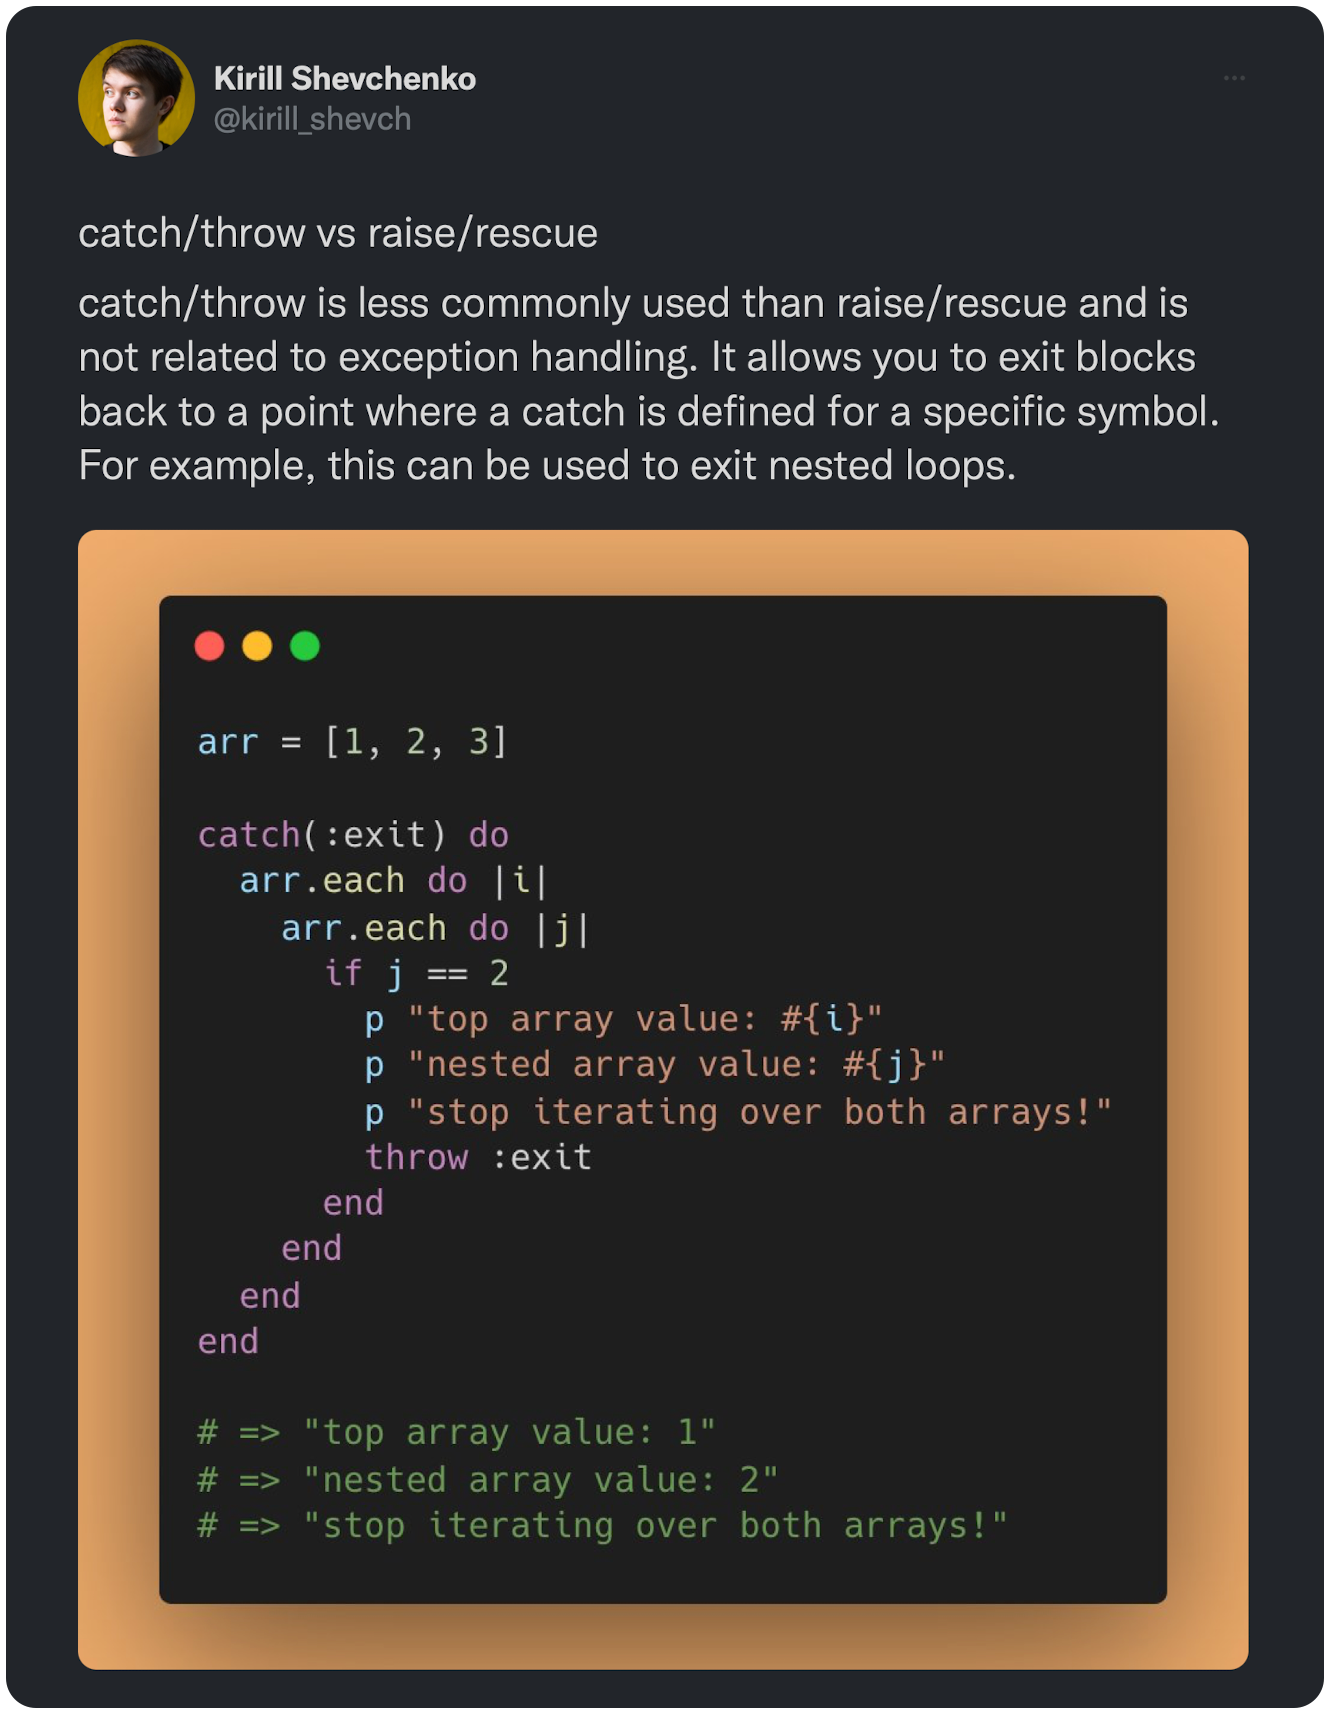 catch/throw vs raise/rescue catch/throw is less commonly used than raise/rescue and is not related to exception handling. It allows you to exit blocks back to a point where a catch is defined for a specific symbol. For example, this can be used to exit nested loops